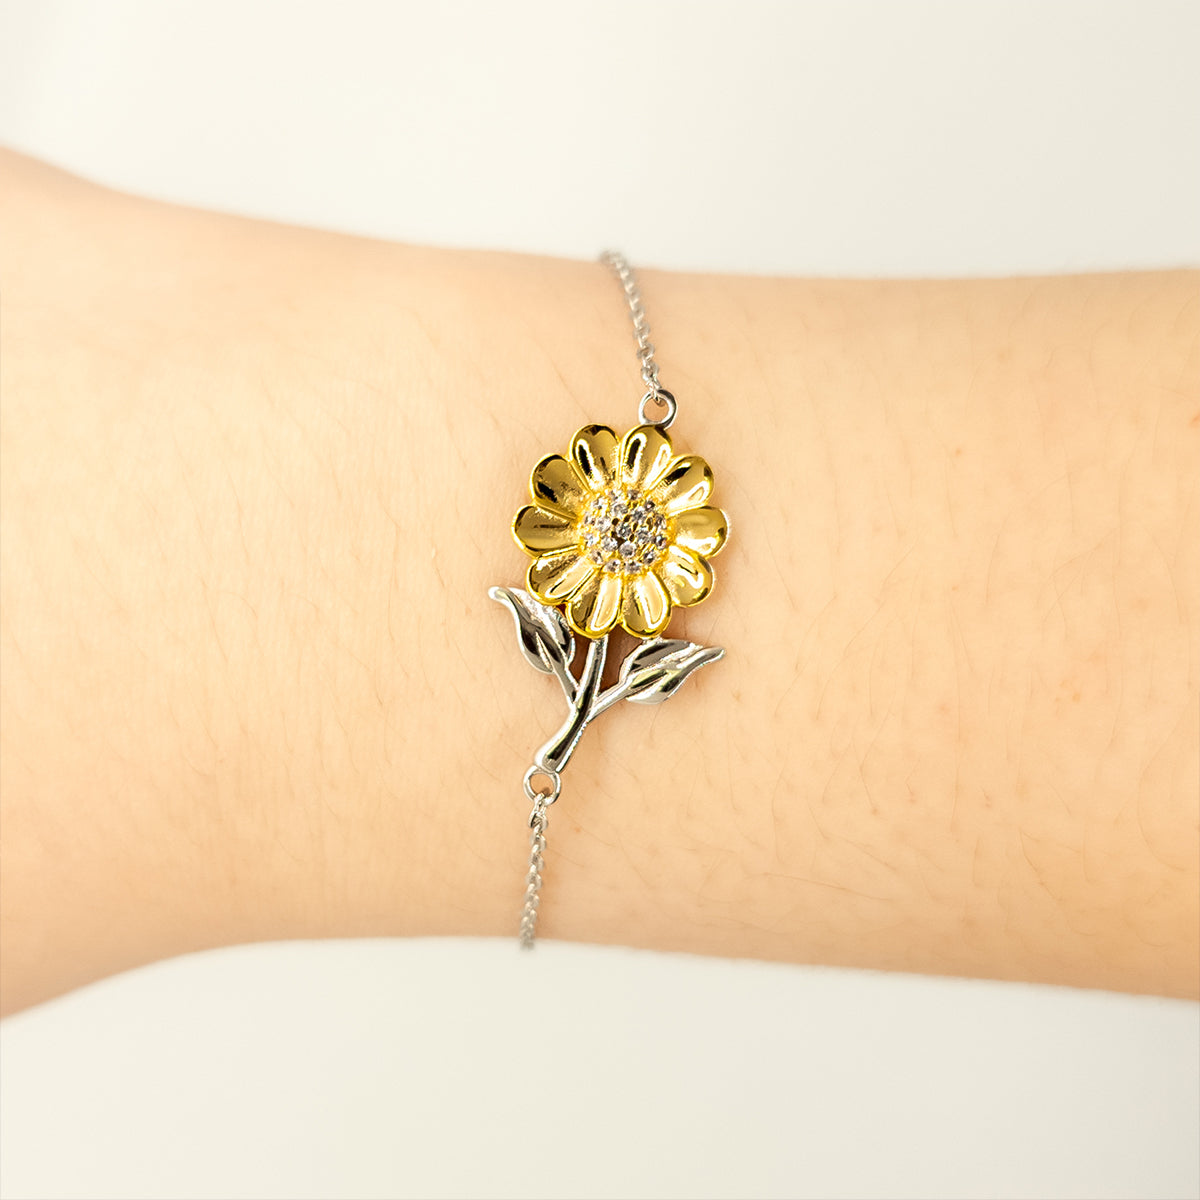 Sunflower Bracelet Stepdad You will always have a special place in my heart Birthday Gift Meaningful Jewelry Confidence and Love for Him